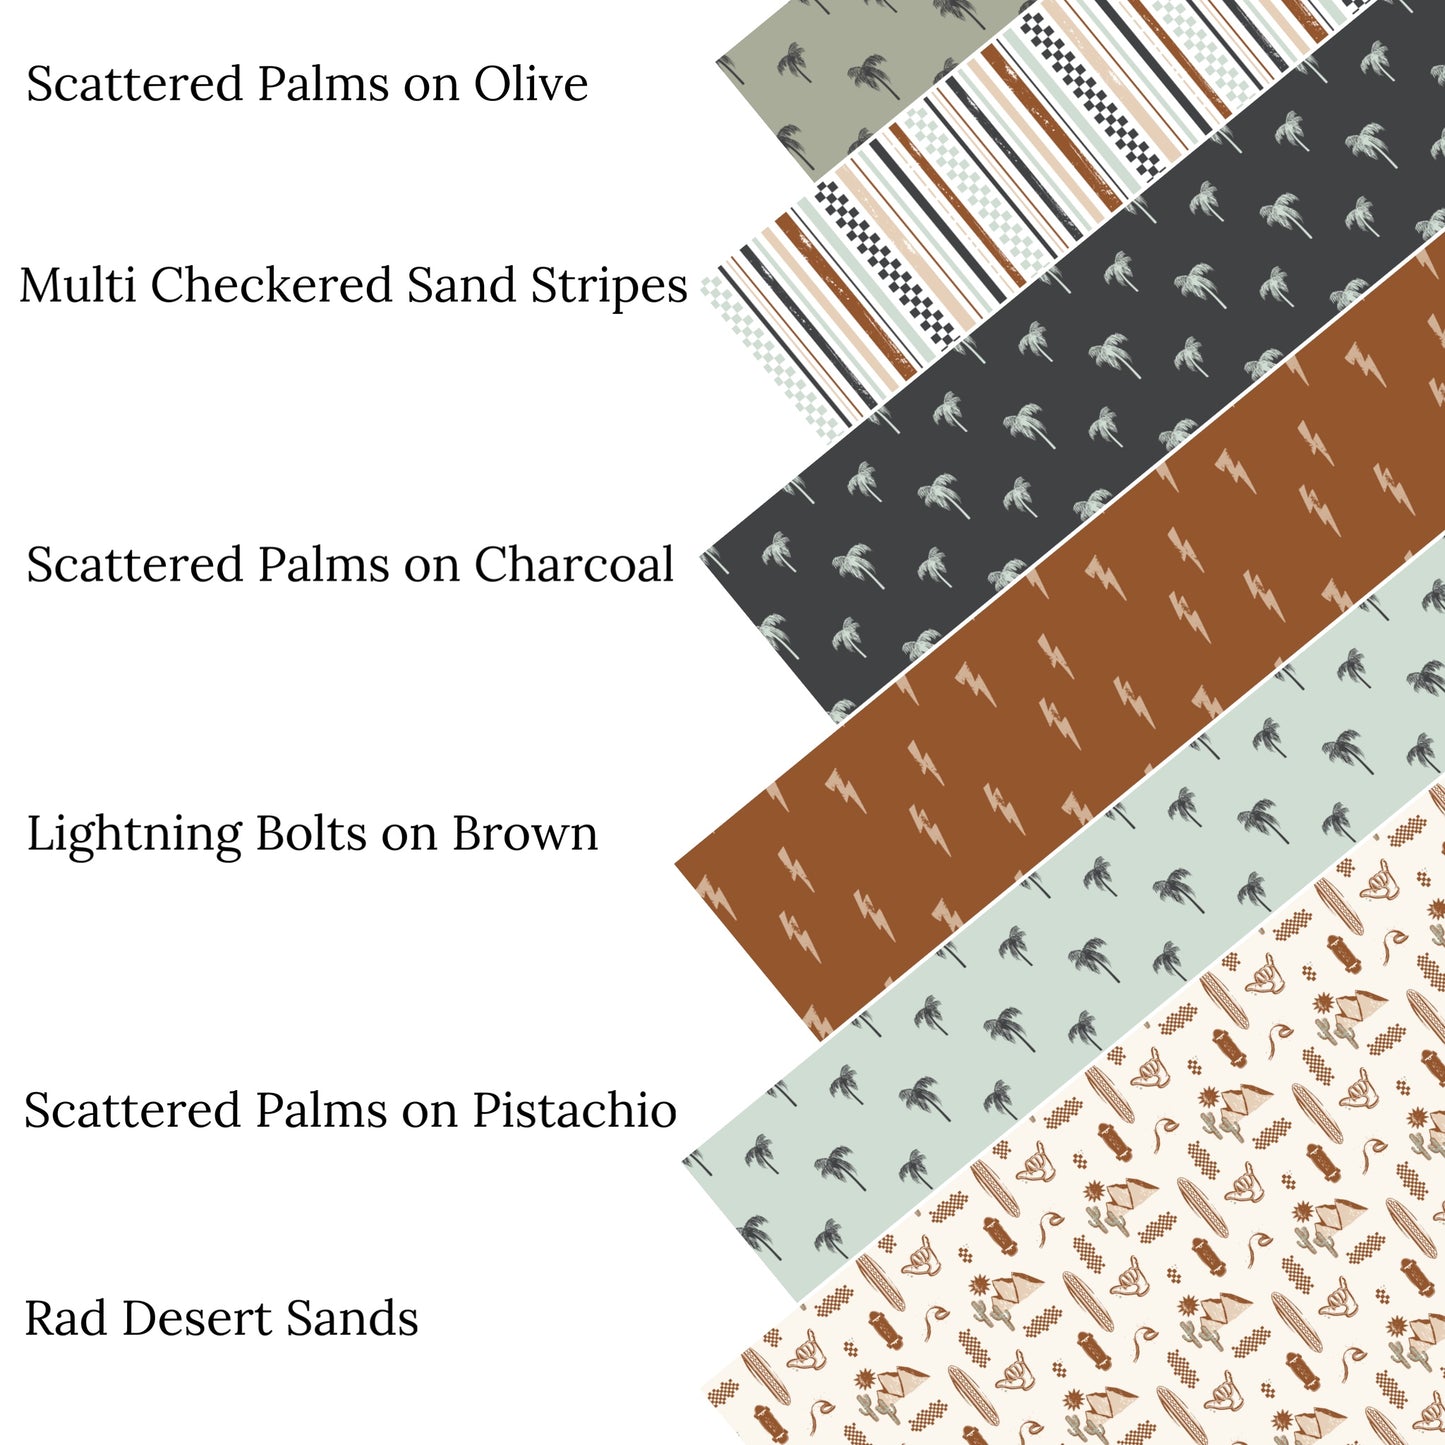 Scattered Palms on Pistachio Faux Leather Sheets